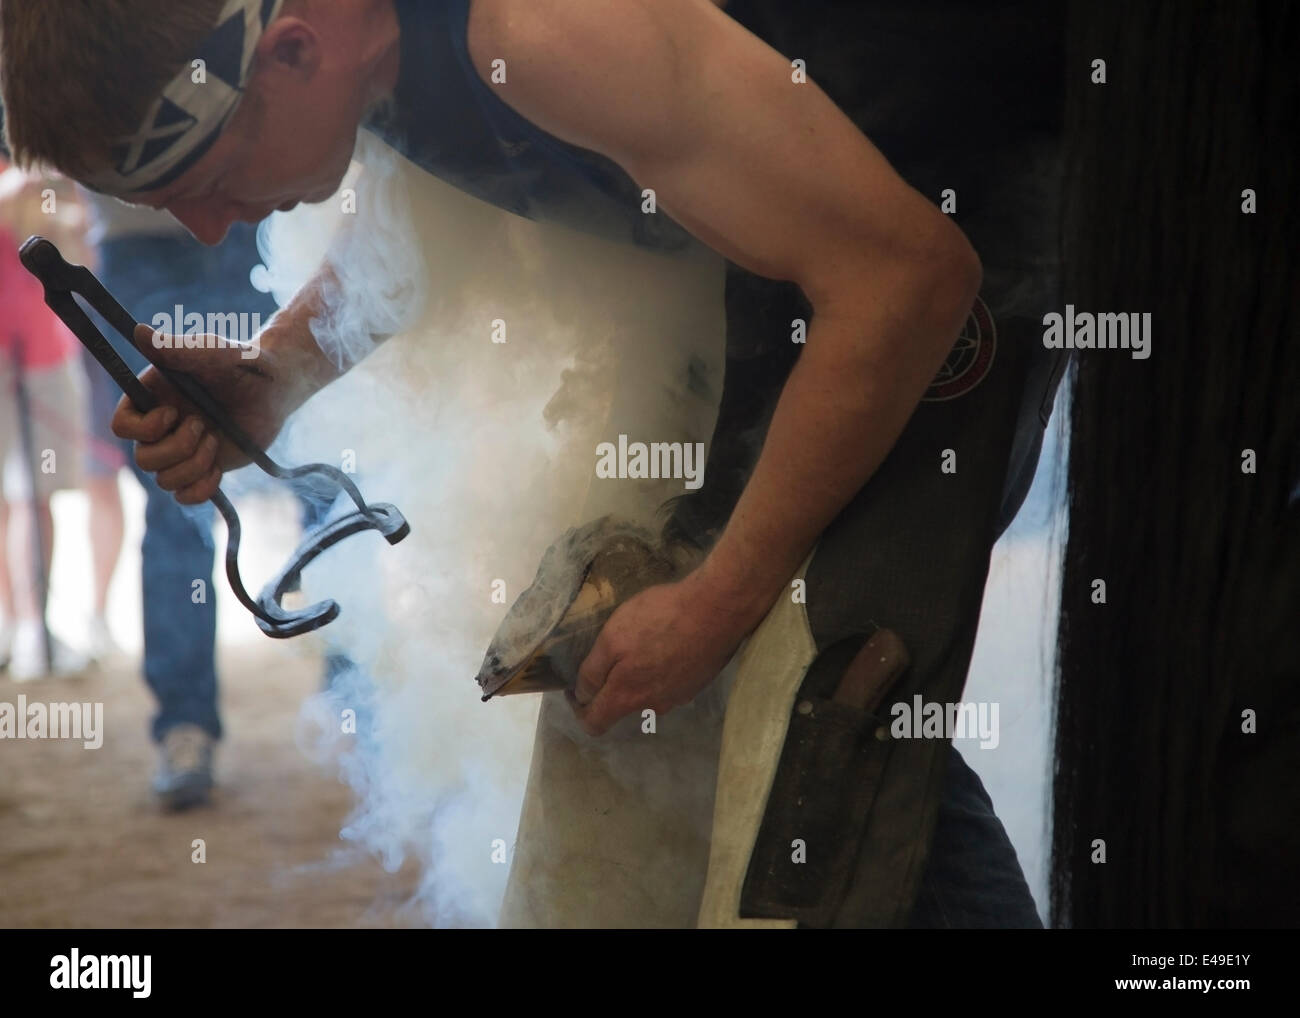 Calgary, Alberta, Canada. 06th July, 2014. Farrier fitting hot horse shoe to the horse's hoof as he competes in the last moments of the final round of the World Championships Blacksmiths' competition at the Calgary Stampede on Sunday, July 6, 2014. The top five farriers are competing for the title of world champion in this longstanding tradition at the Stampede. Calgary, Alberta, Canada. Credit:  Rosanne Tackaberry/Alamy Live News Stock Photo